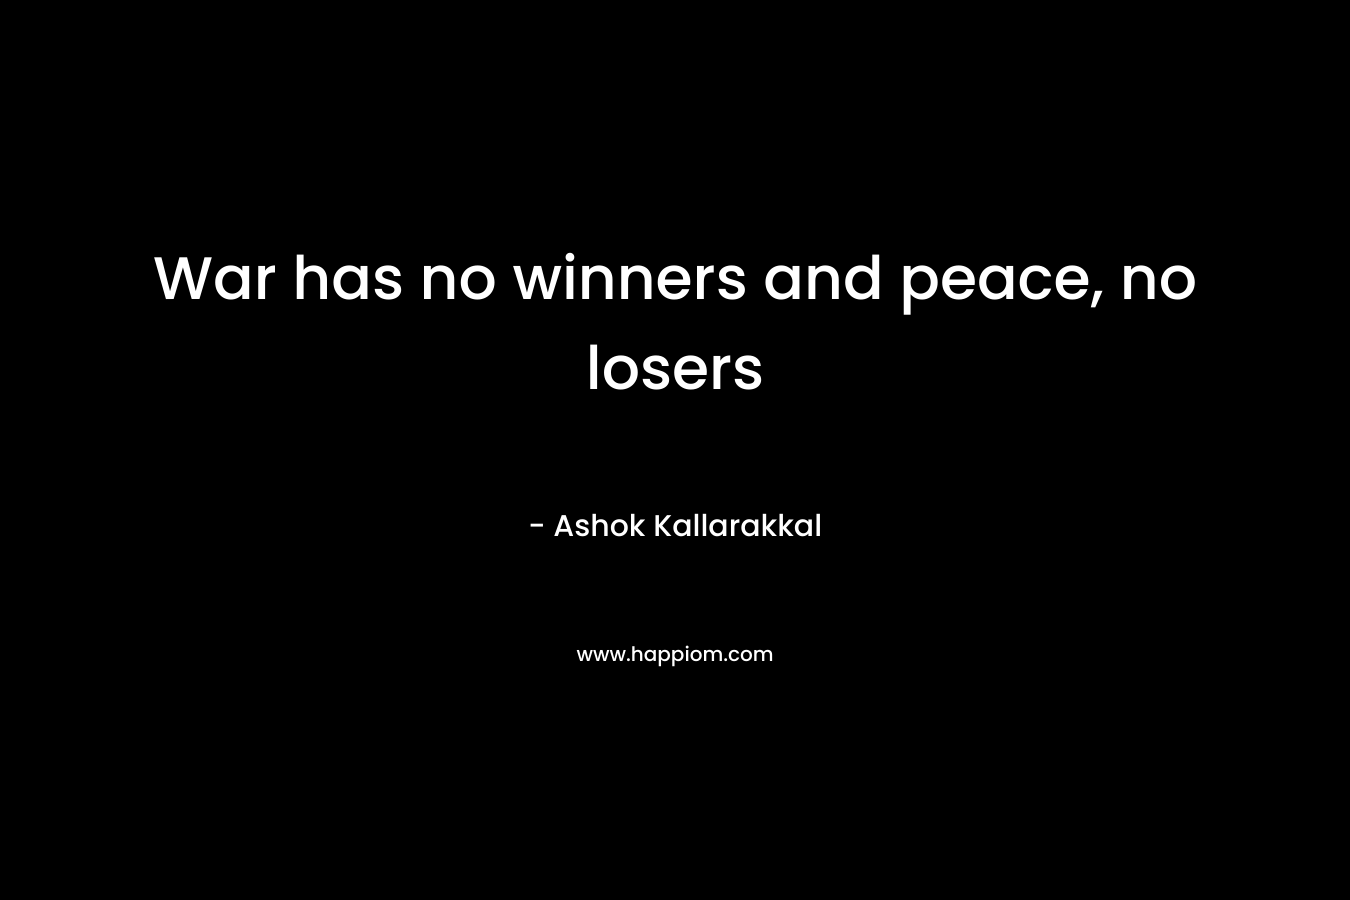 War has no winners and peace, no losers